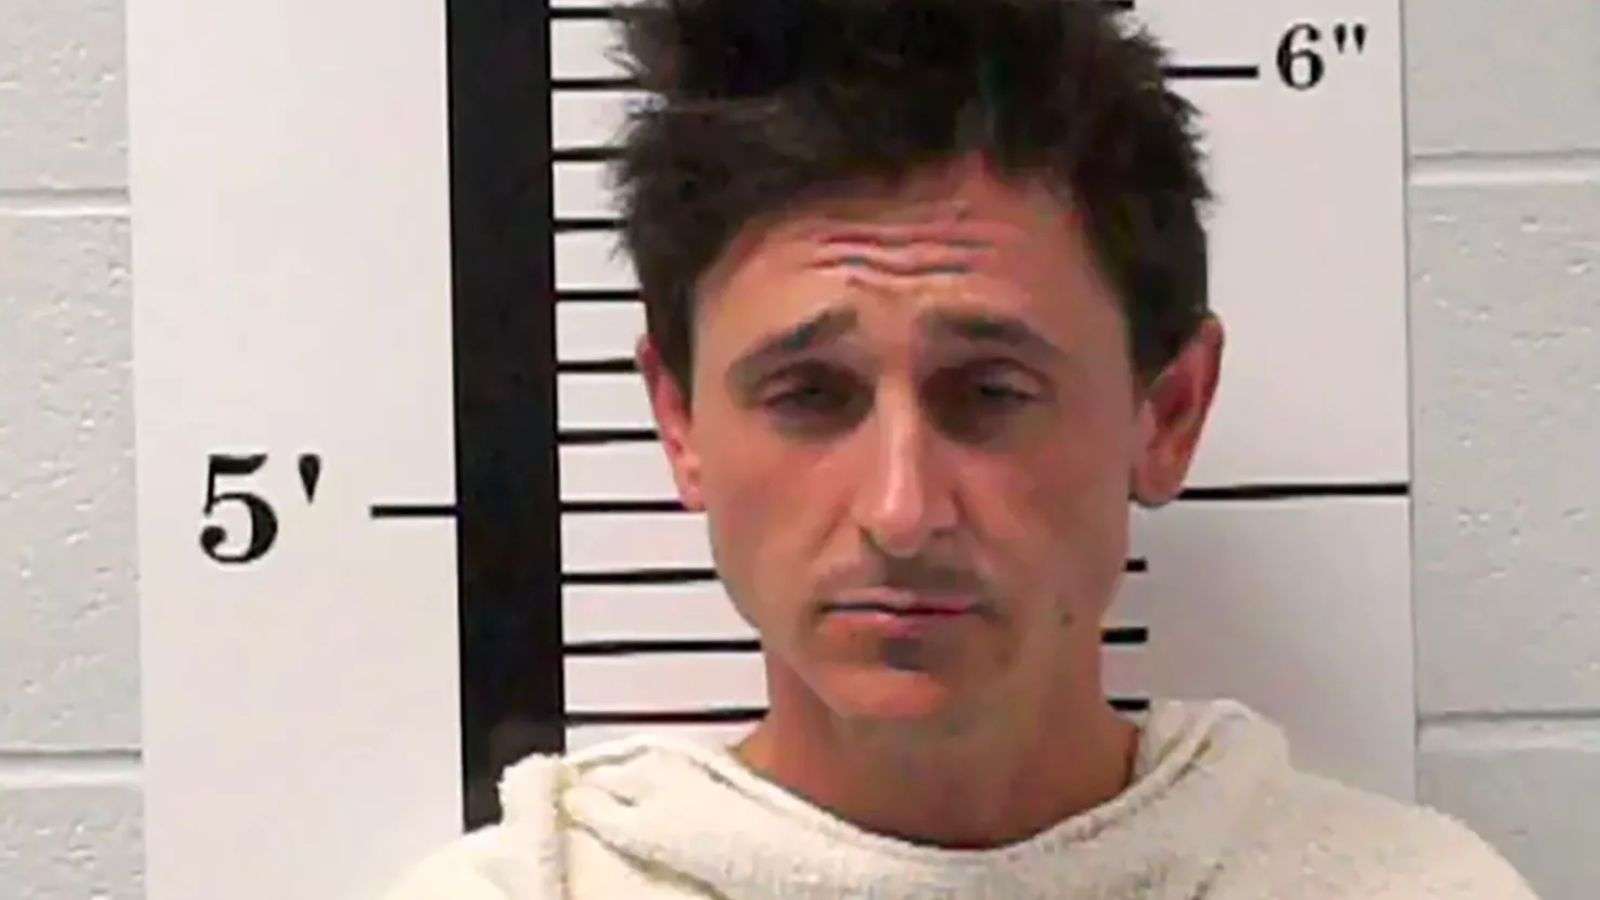 Hannah Montana's Mitchell Musso arrested